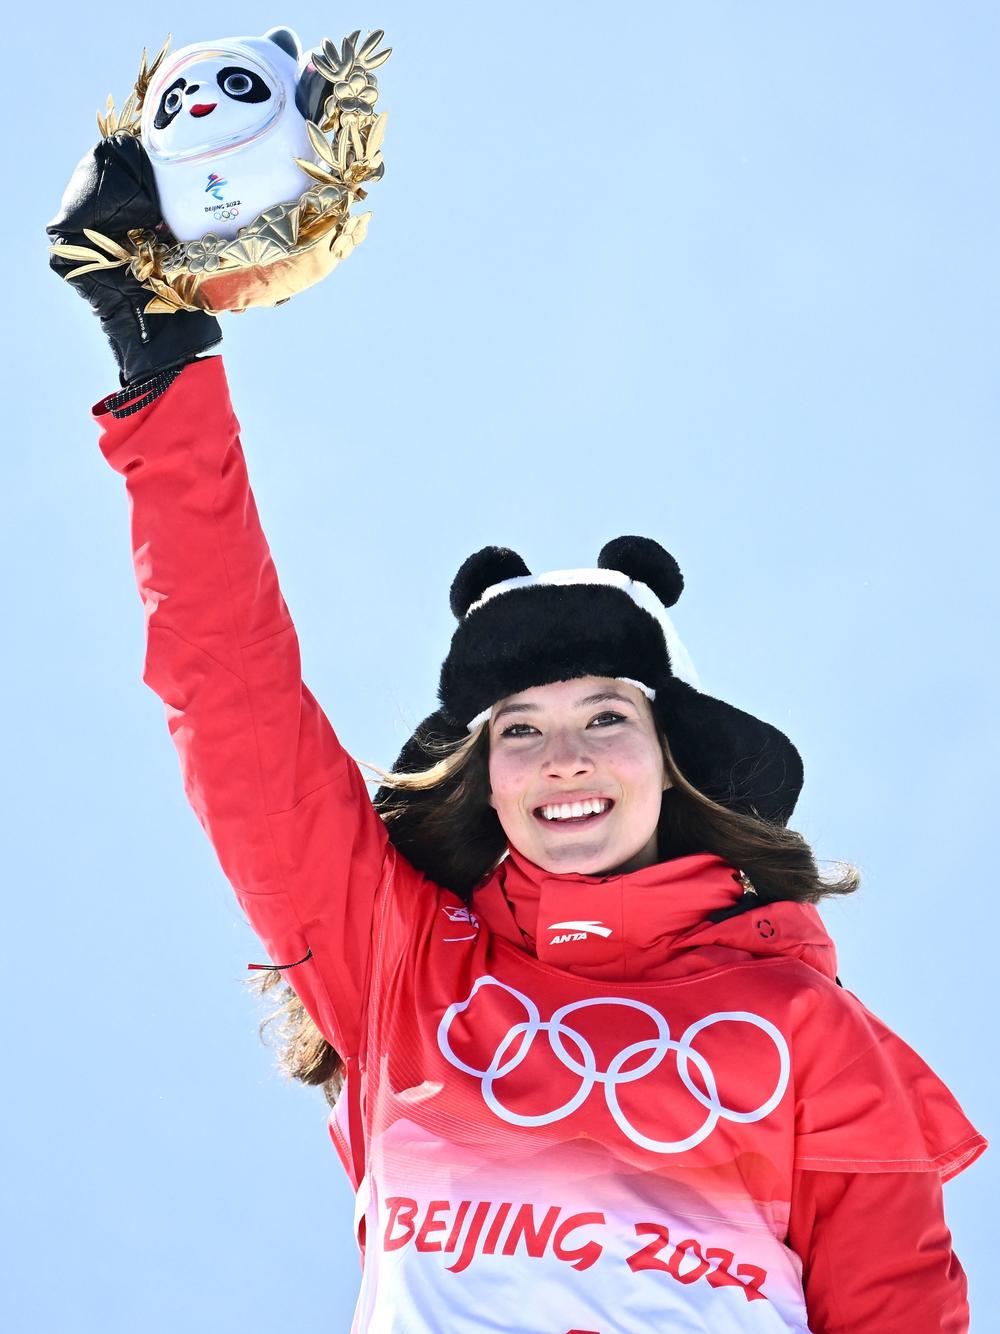 Gold medalist Eileen Gu, competing for China, poses on the podium during the venue ceremony after the freestyle skiing women's freeski halfpipe on Friday.